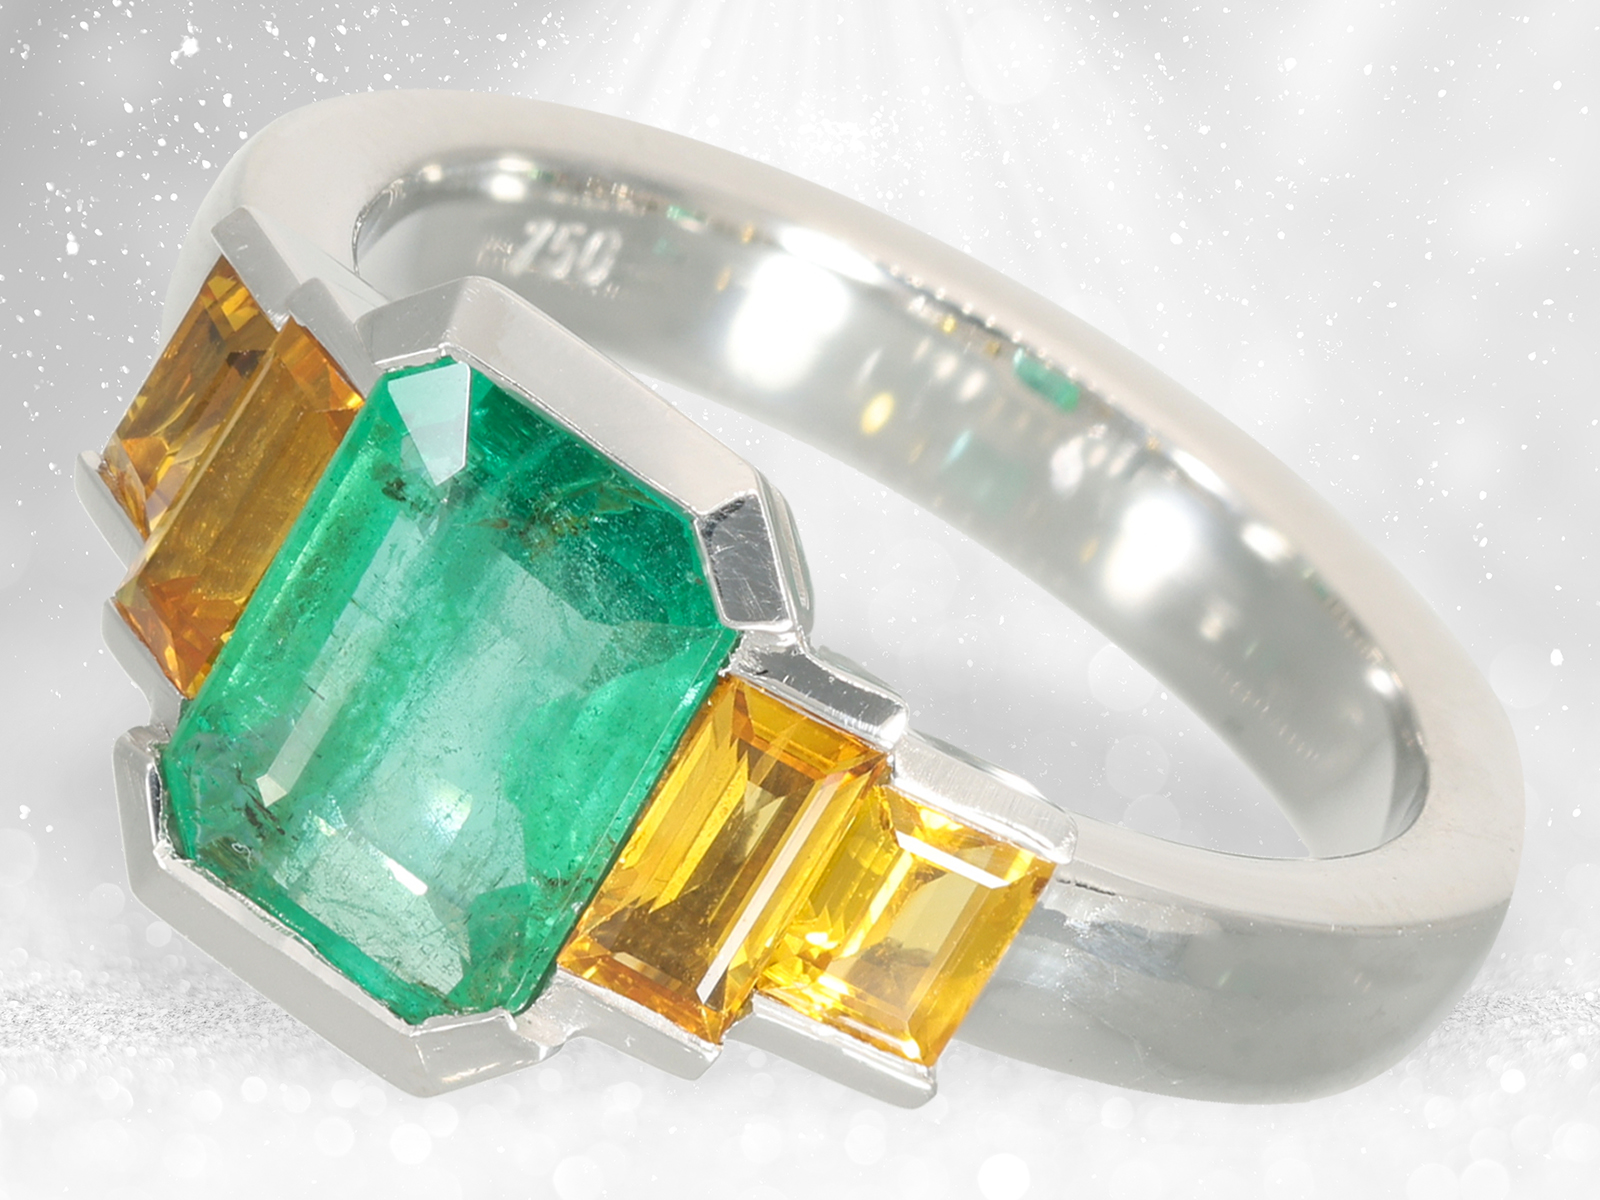 Ring: high quality goldsmith's work with emerald and sapphire set, handmade by Schupp manufactory - Image 2 of 4